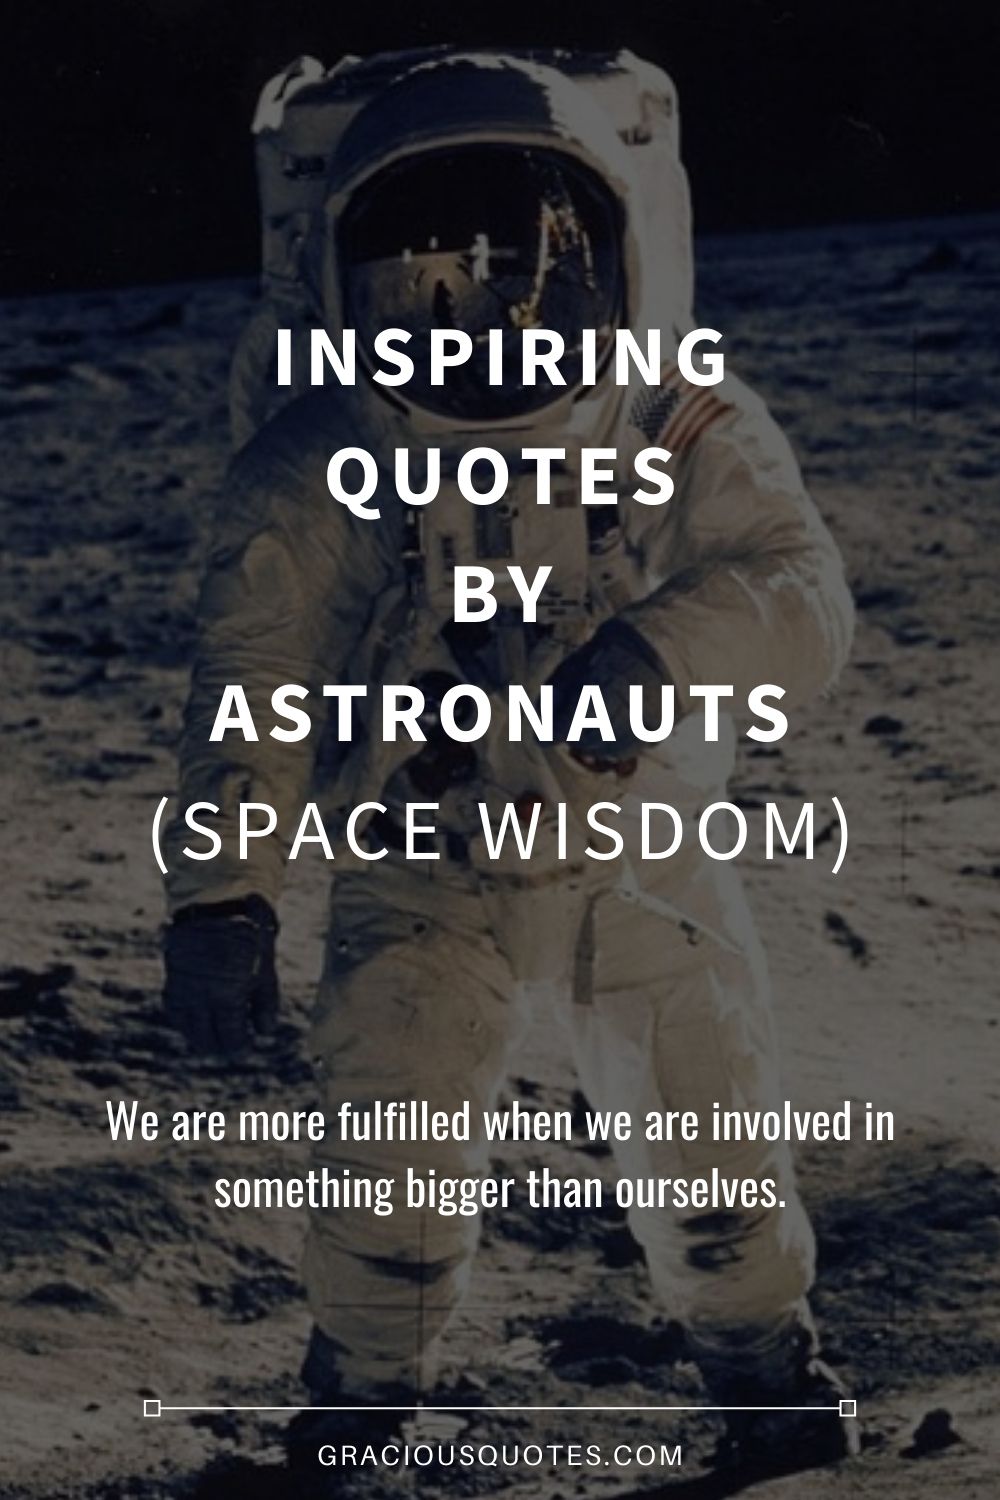 Inspiring Quotes by Astronauts (SPACE WISDOM) - Gracious Quotes